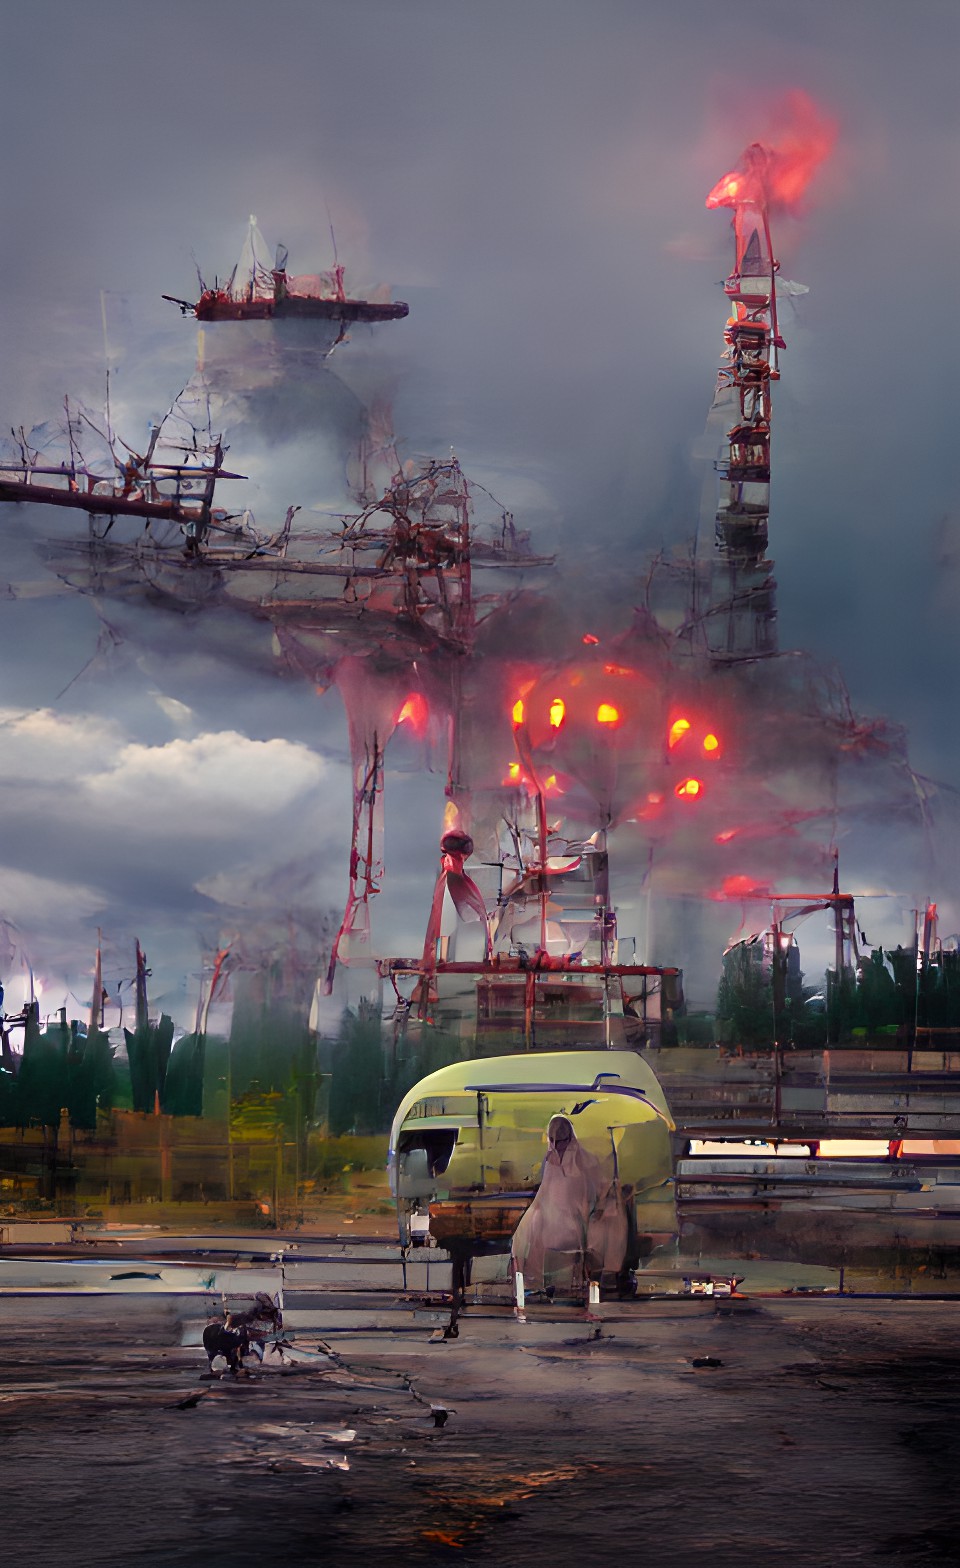 There is something in Chernobyl